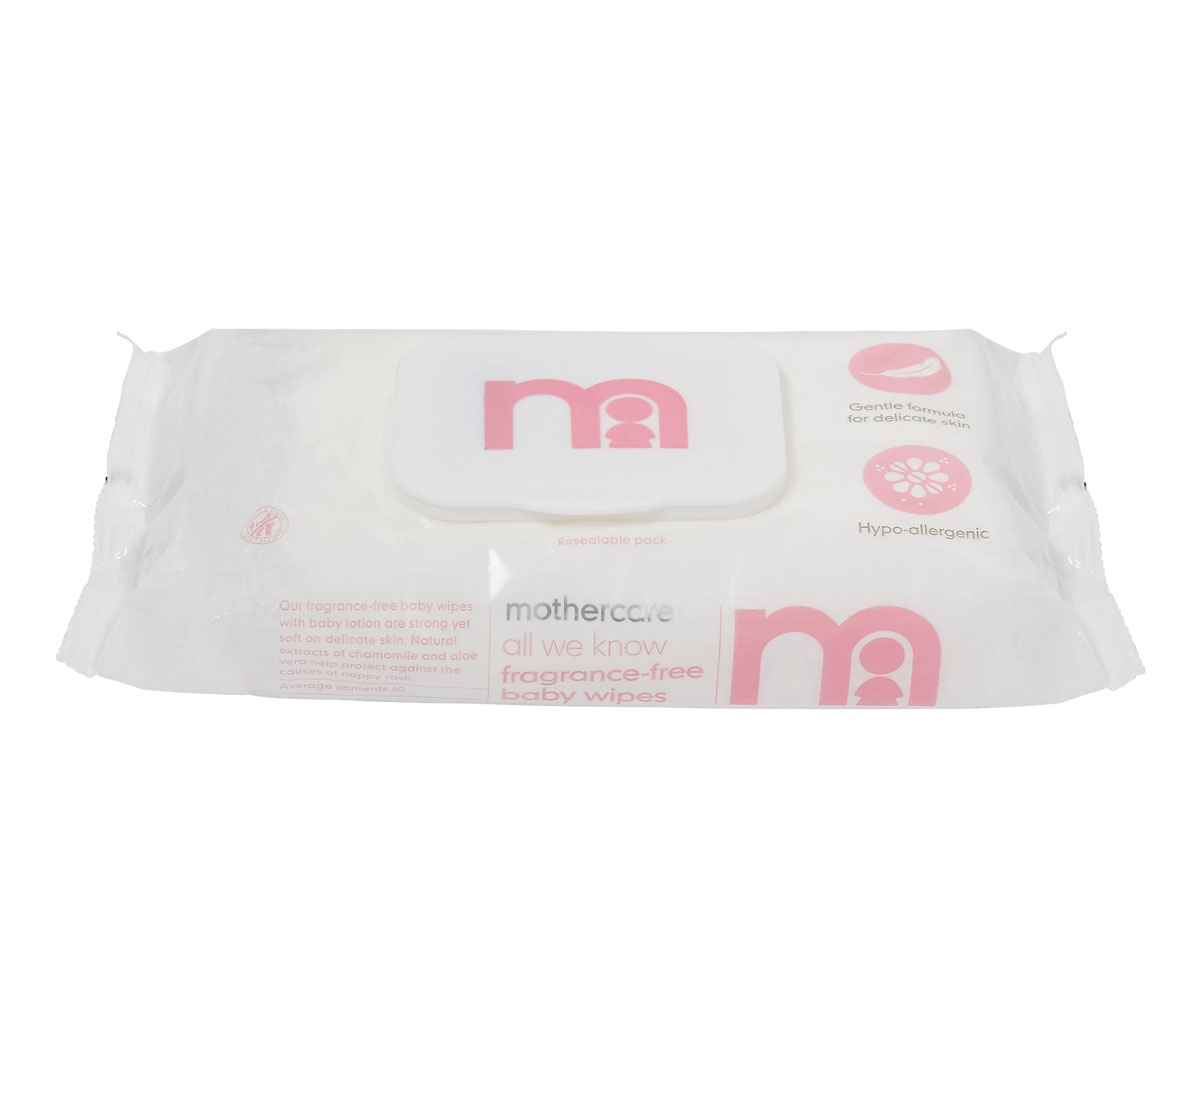 Mothercare | Mothercare All We Know Non-Fragranced Baby Wipes Pack of 60